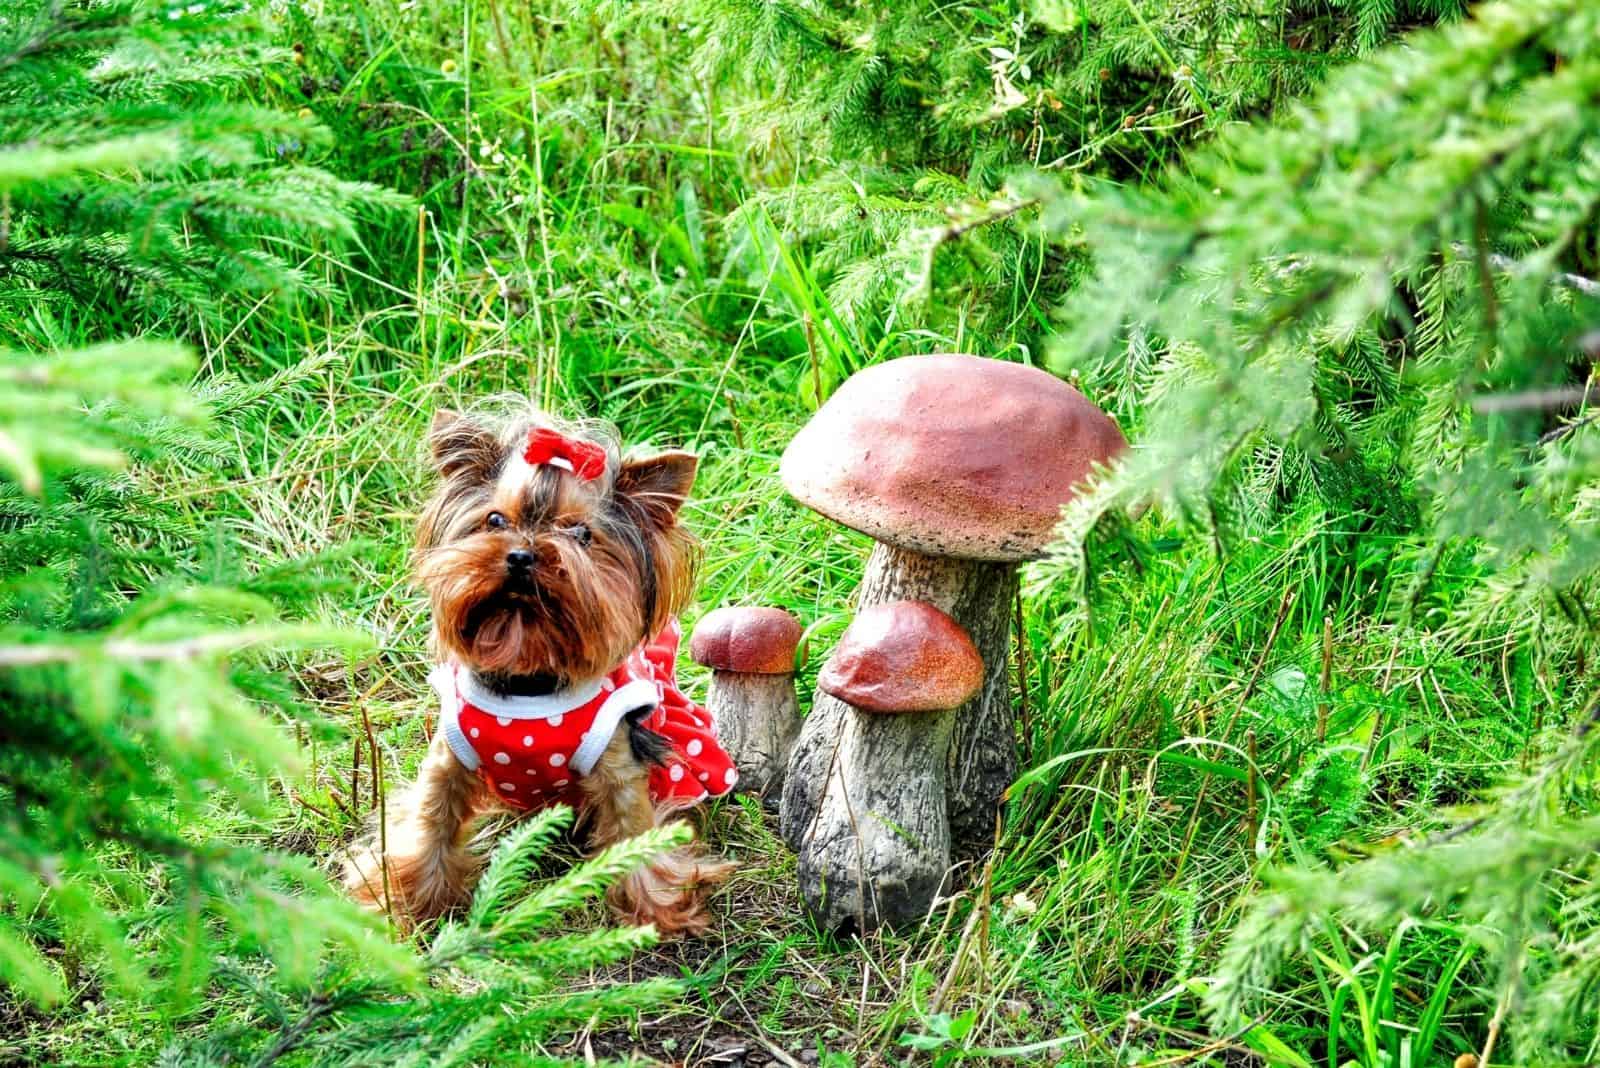 small lovely yorkshire standing next to a mushroom outdoors during summertime